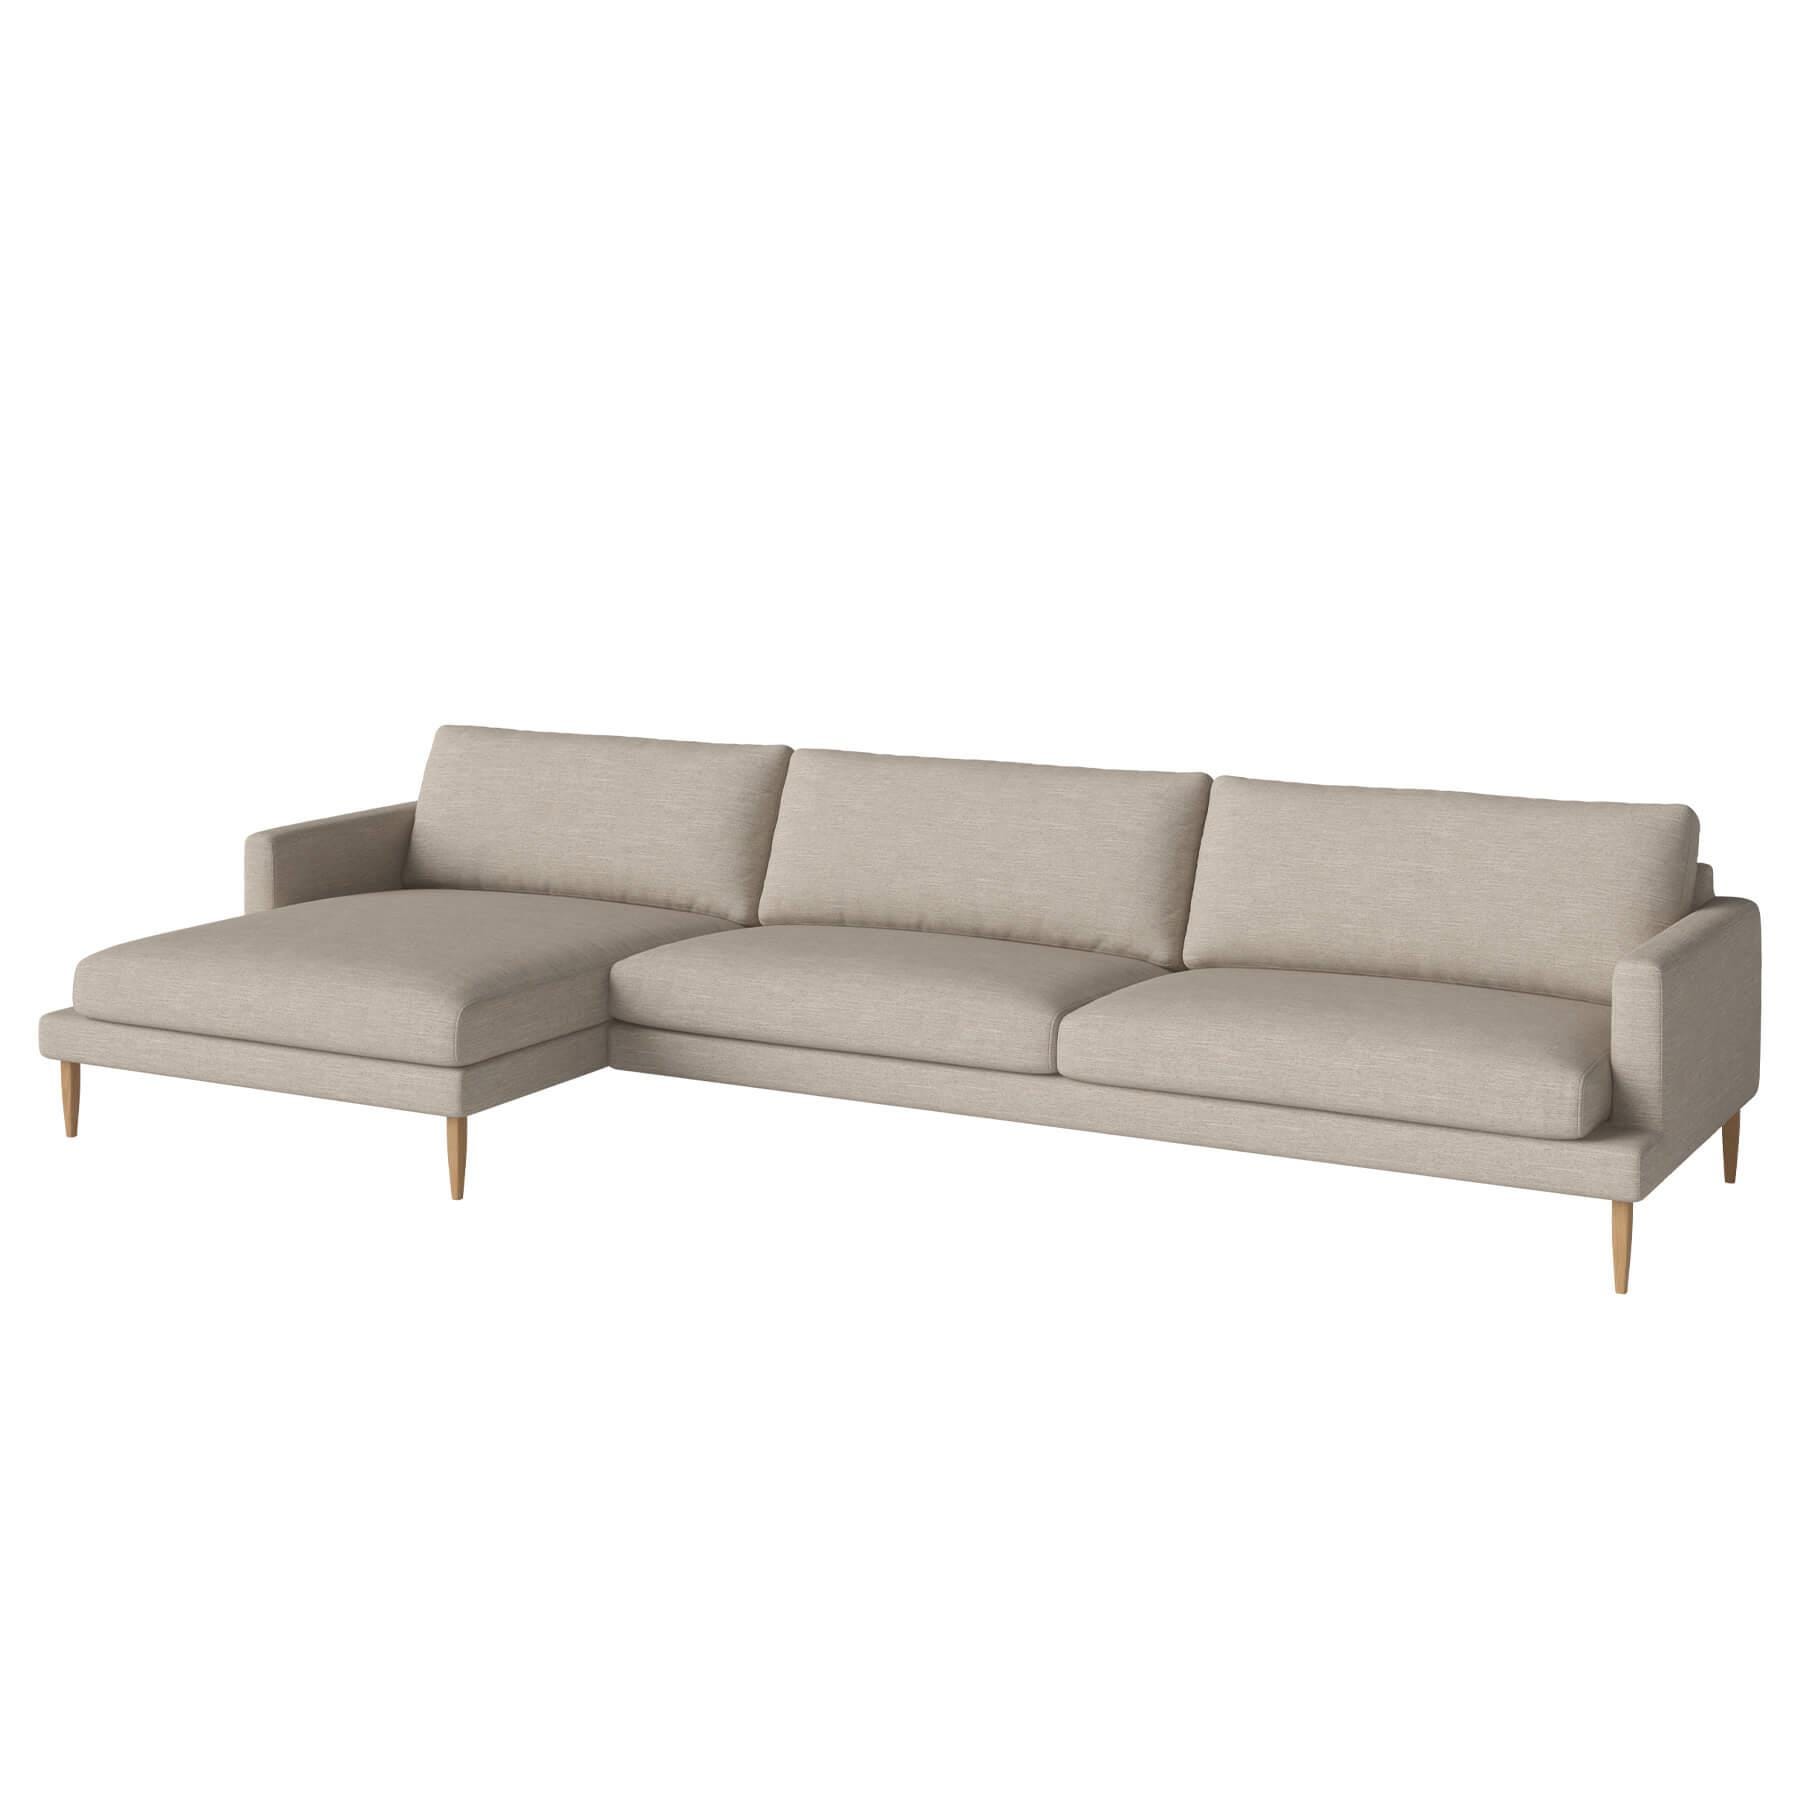 Bolia Veneda Sofa 45 Seater Sofa With Chaise Longue Oiled Oak Baize Sand Left Brown Designer Furniture From Holloways Of Ludlow